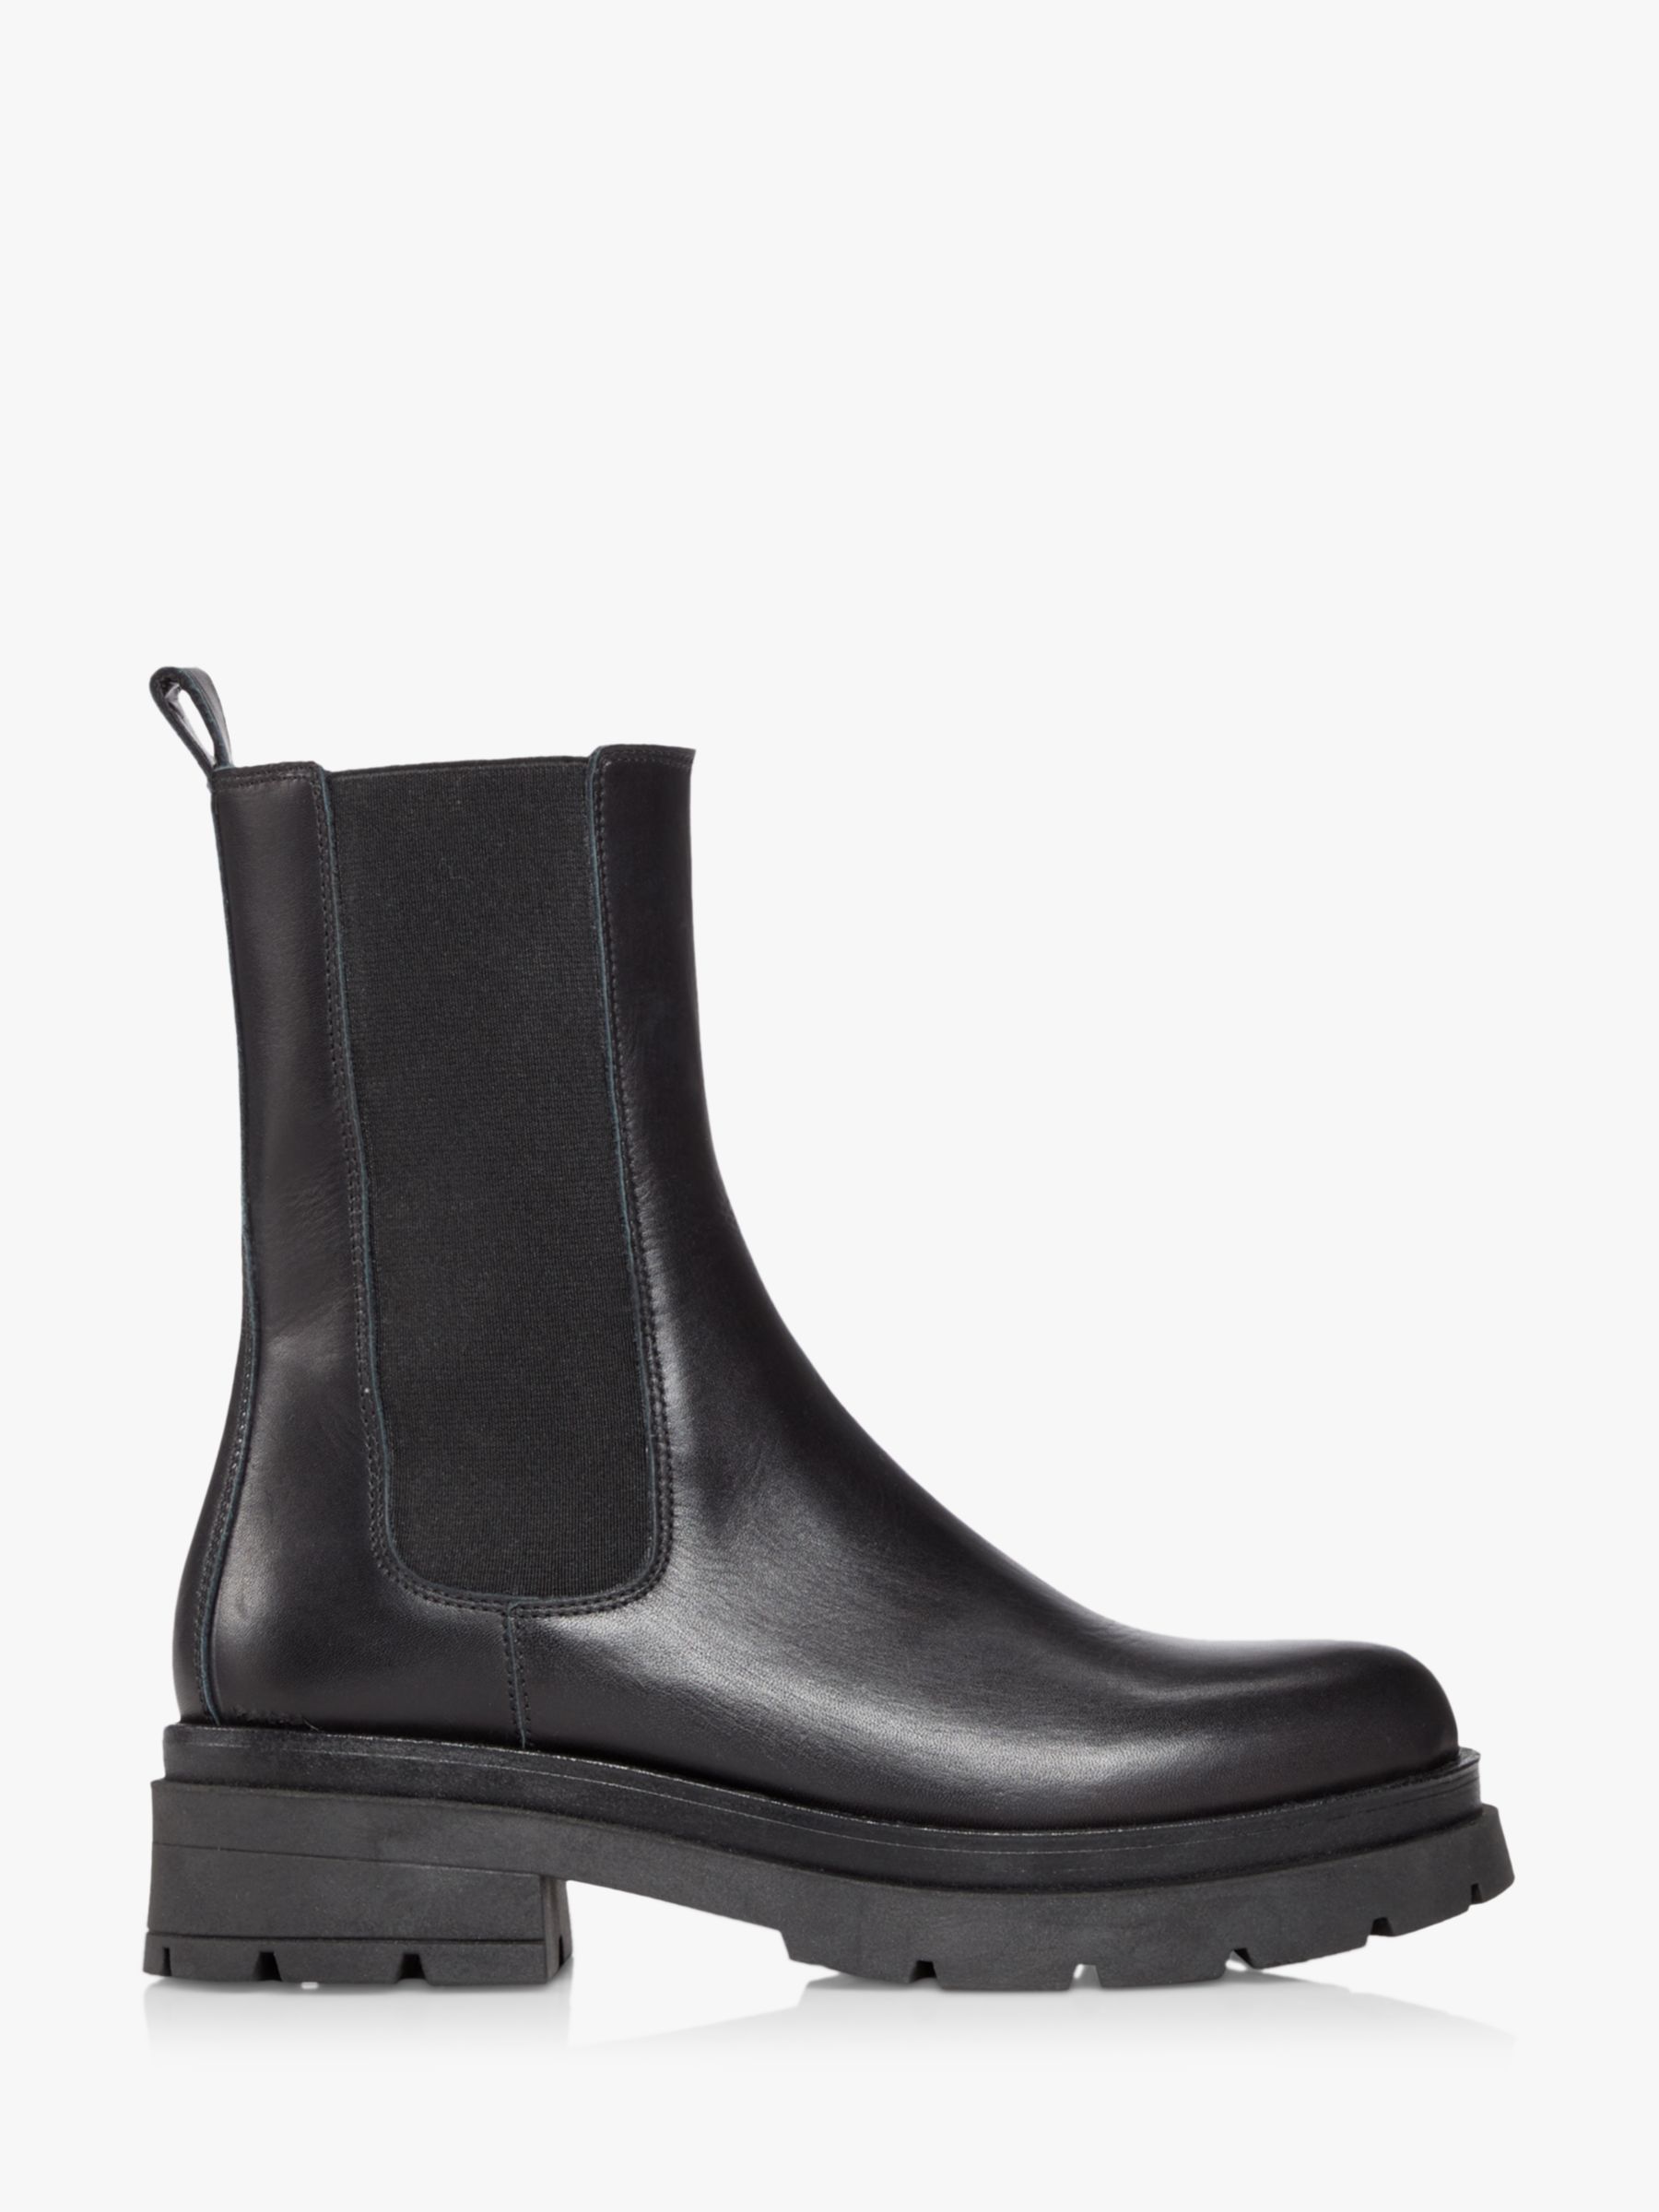 Dune Palms Leather Chelsea Boots, Black at John Lewis & Partners